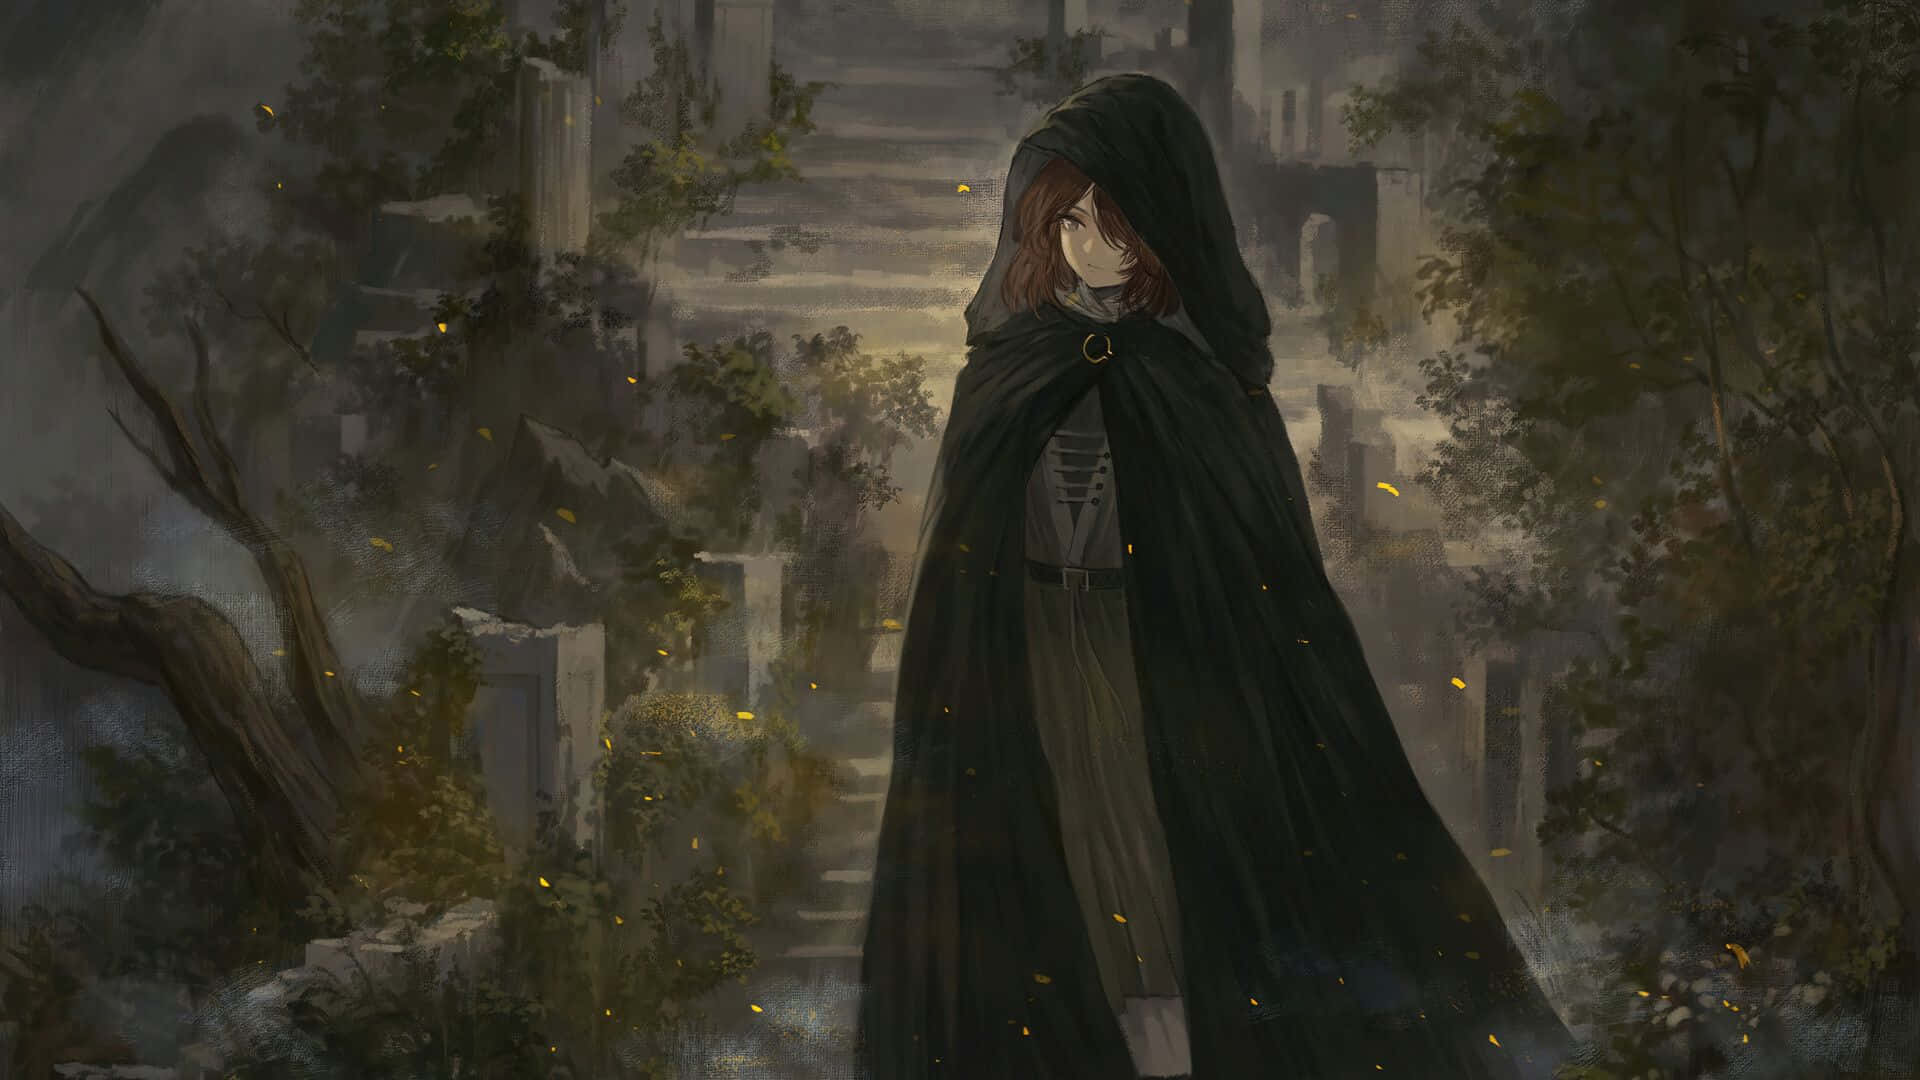 Mysterious Cloaked Figure In Ruins Wallpaper